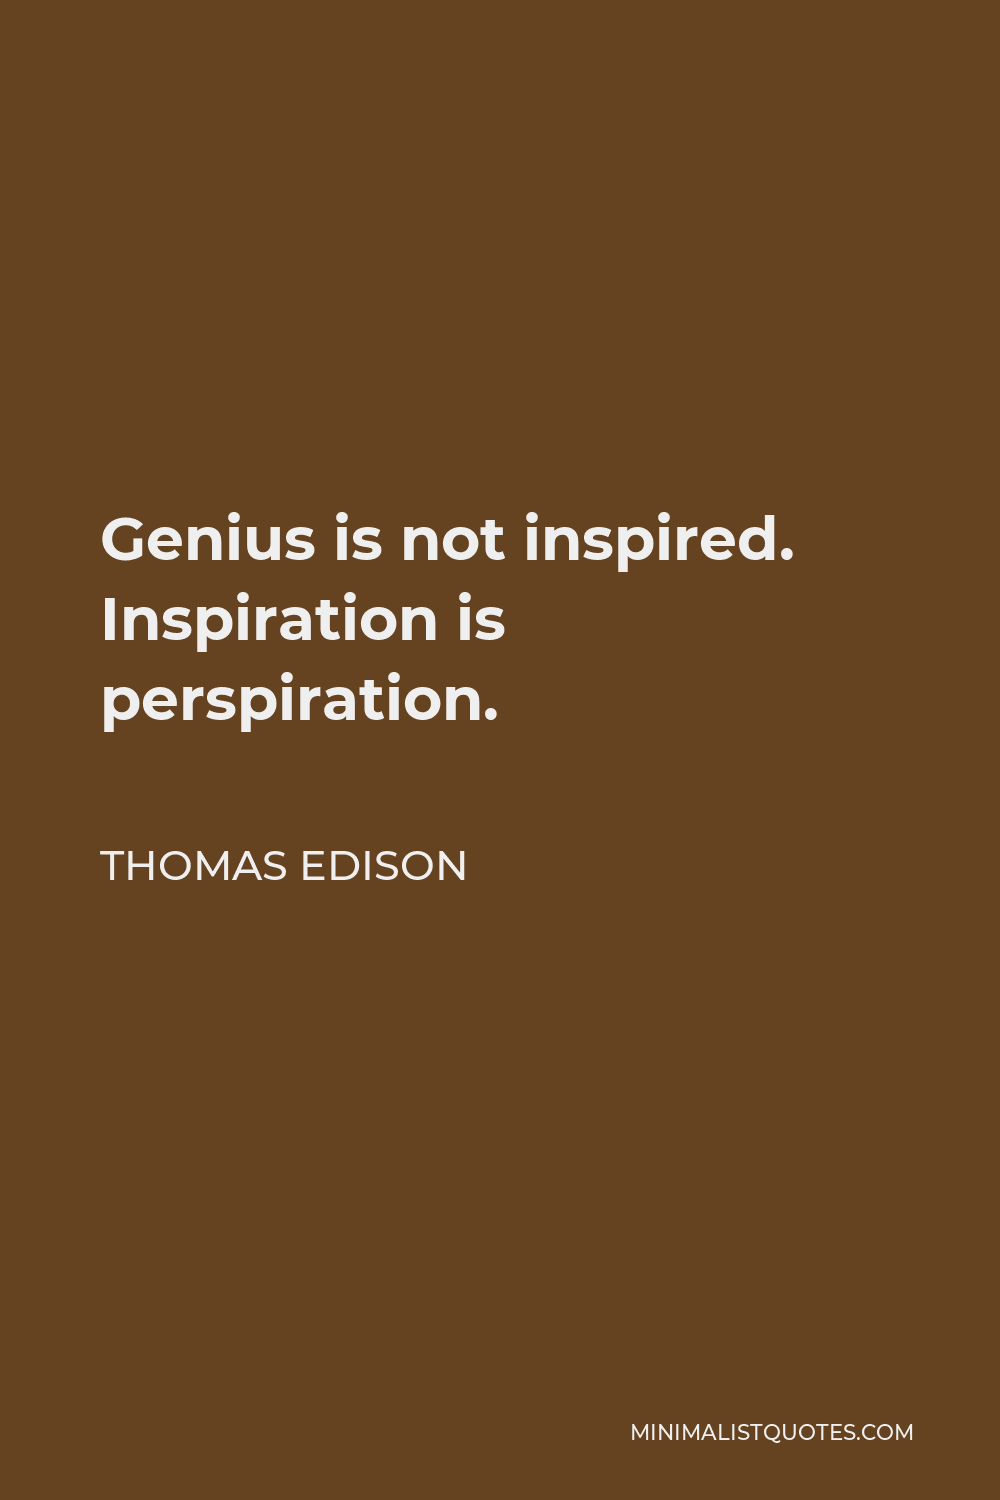 Thomas Edison Quote - Genius is not inspired. Inspiration is perspiration.